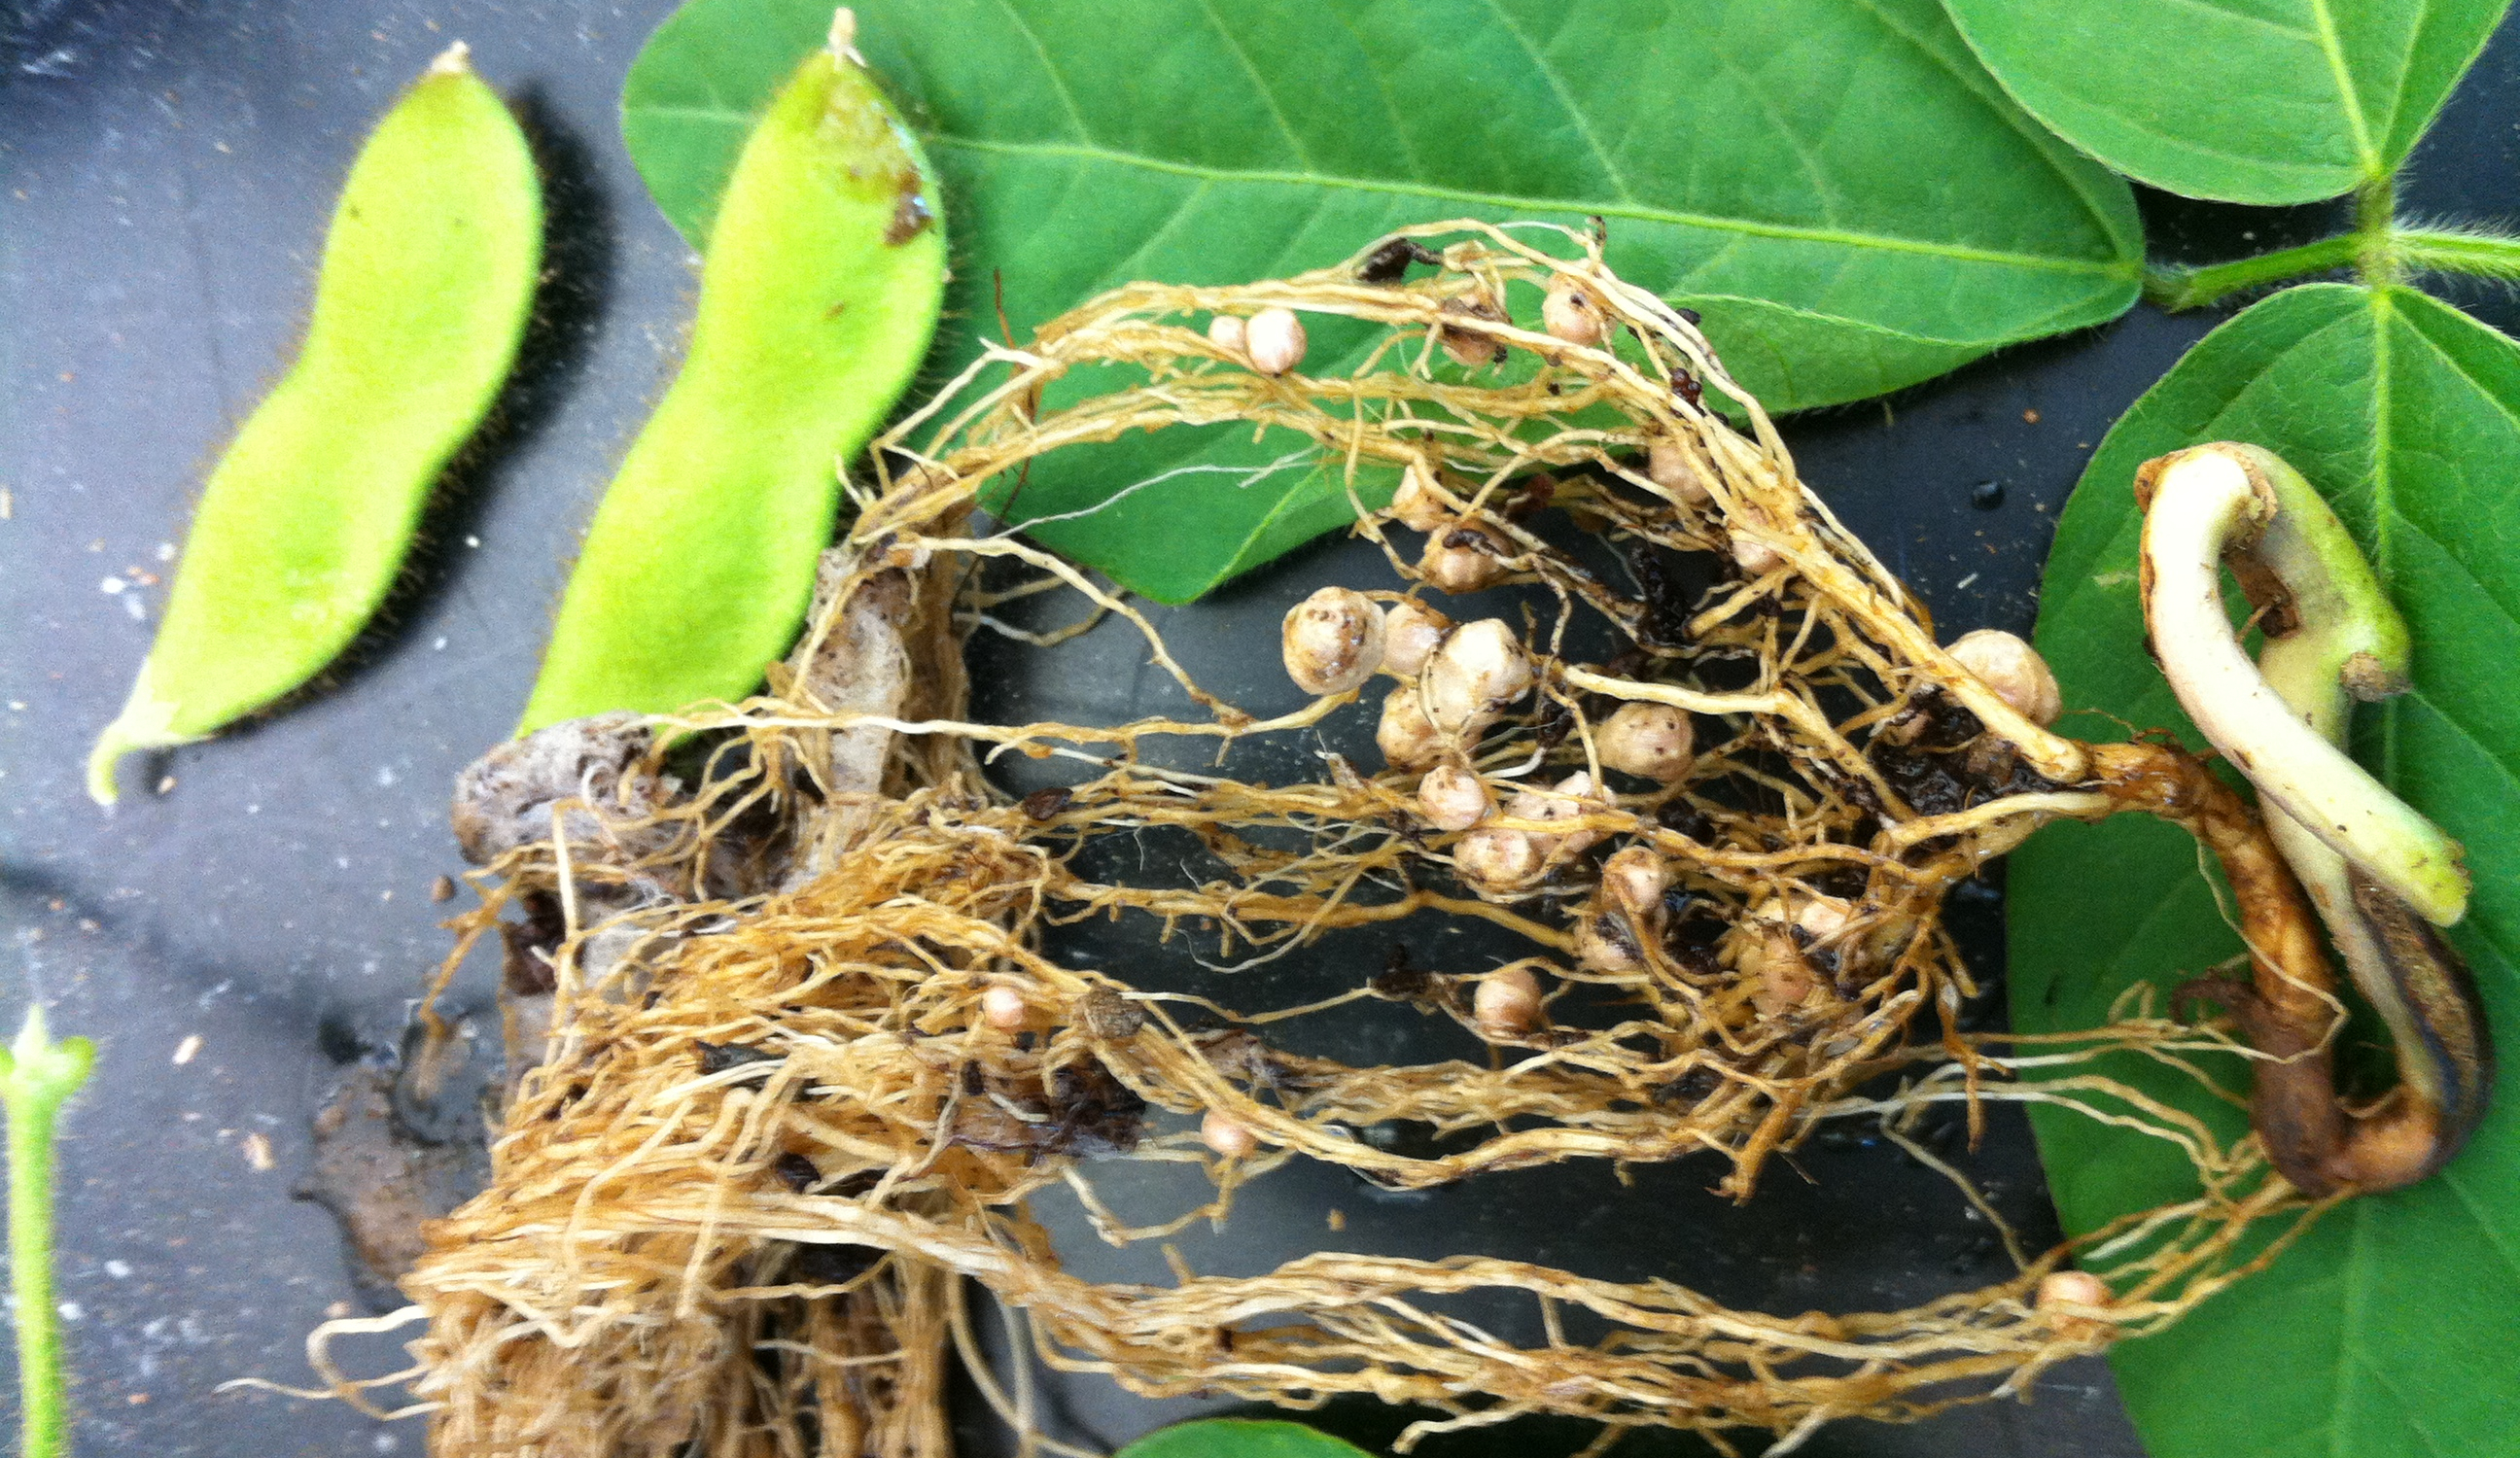 Image of soybean plant separated into parts:  Harvested soybean plant, image by P. 	A. Holden